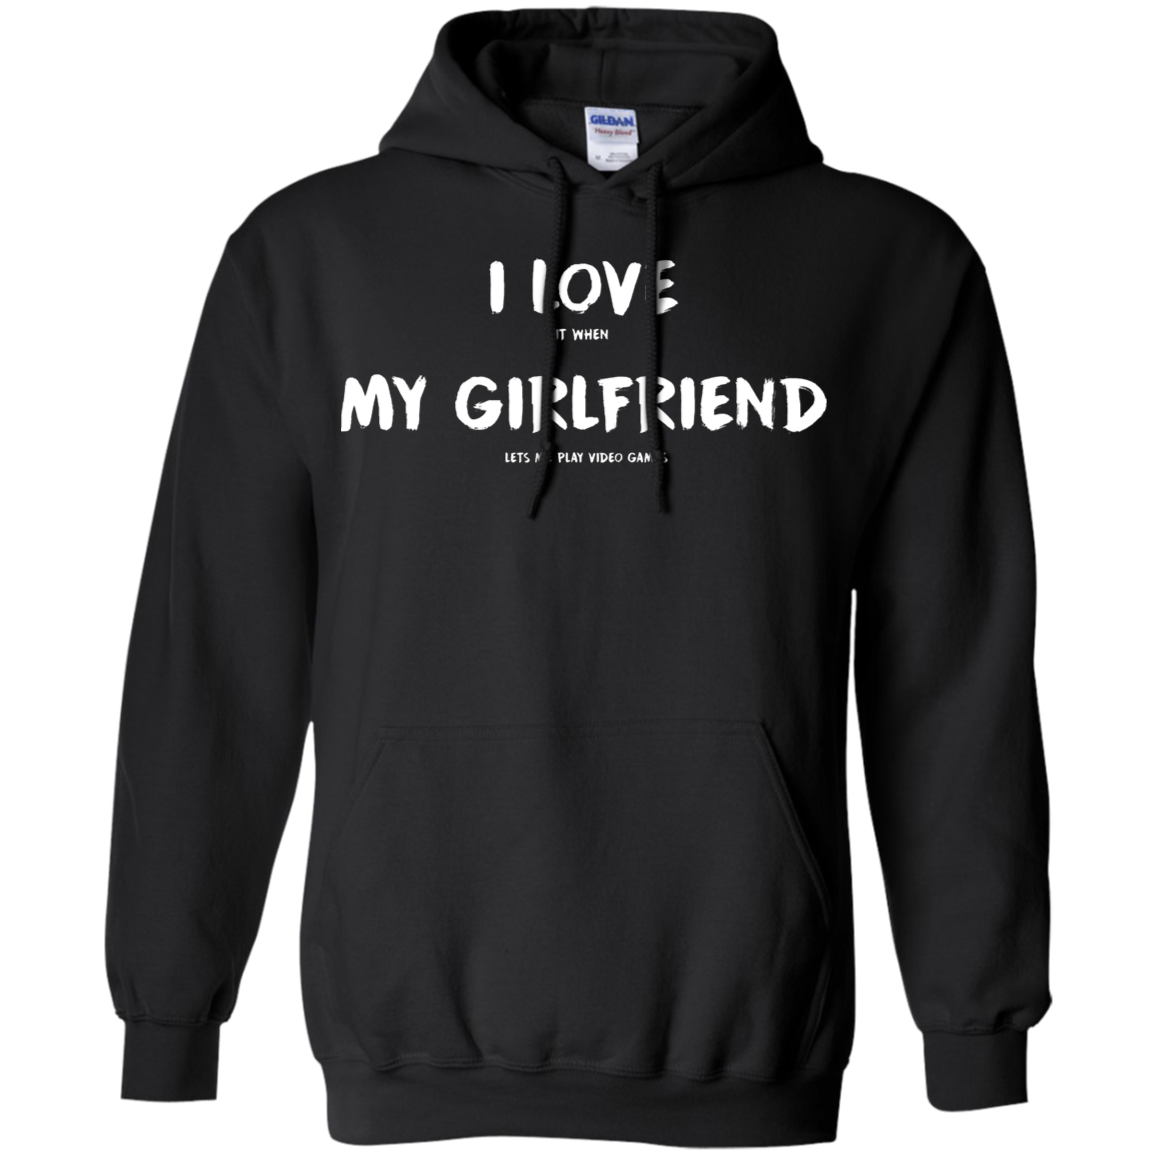 I Love It When My Girlfriend Lets Me Play Video Games - Video Gaming Pullover Hoodie